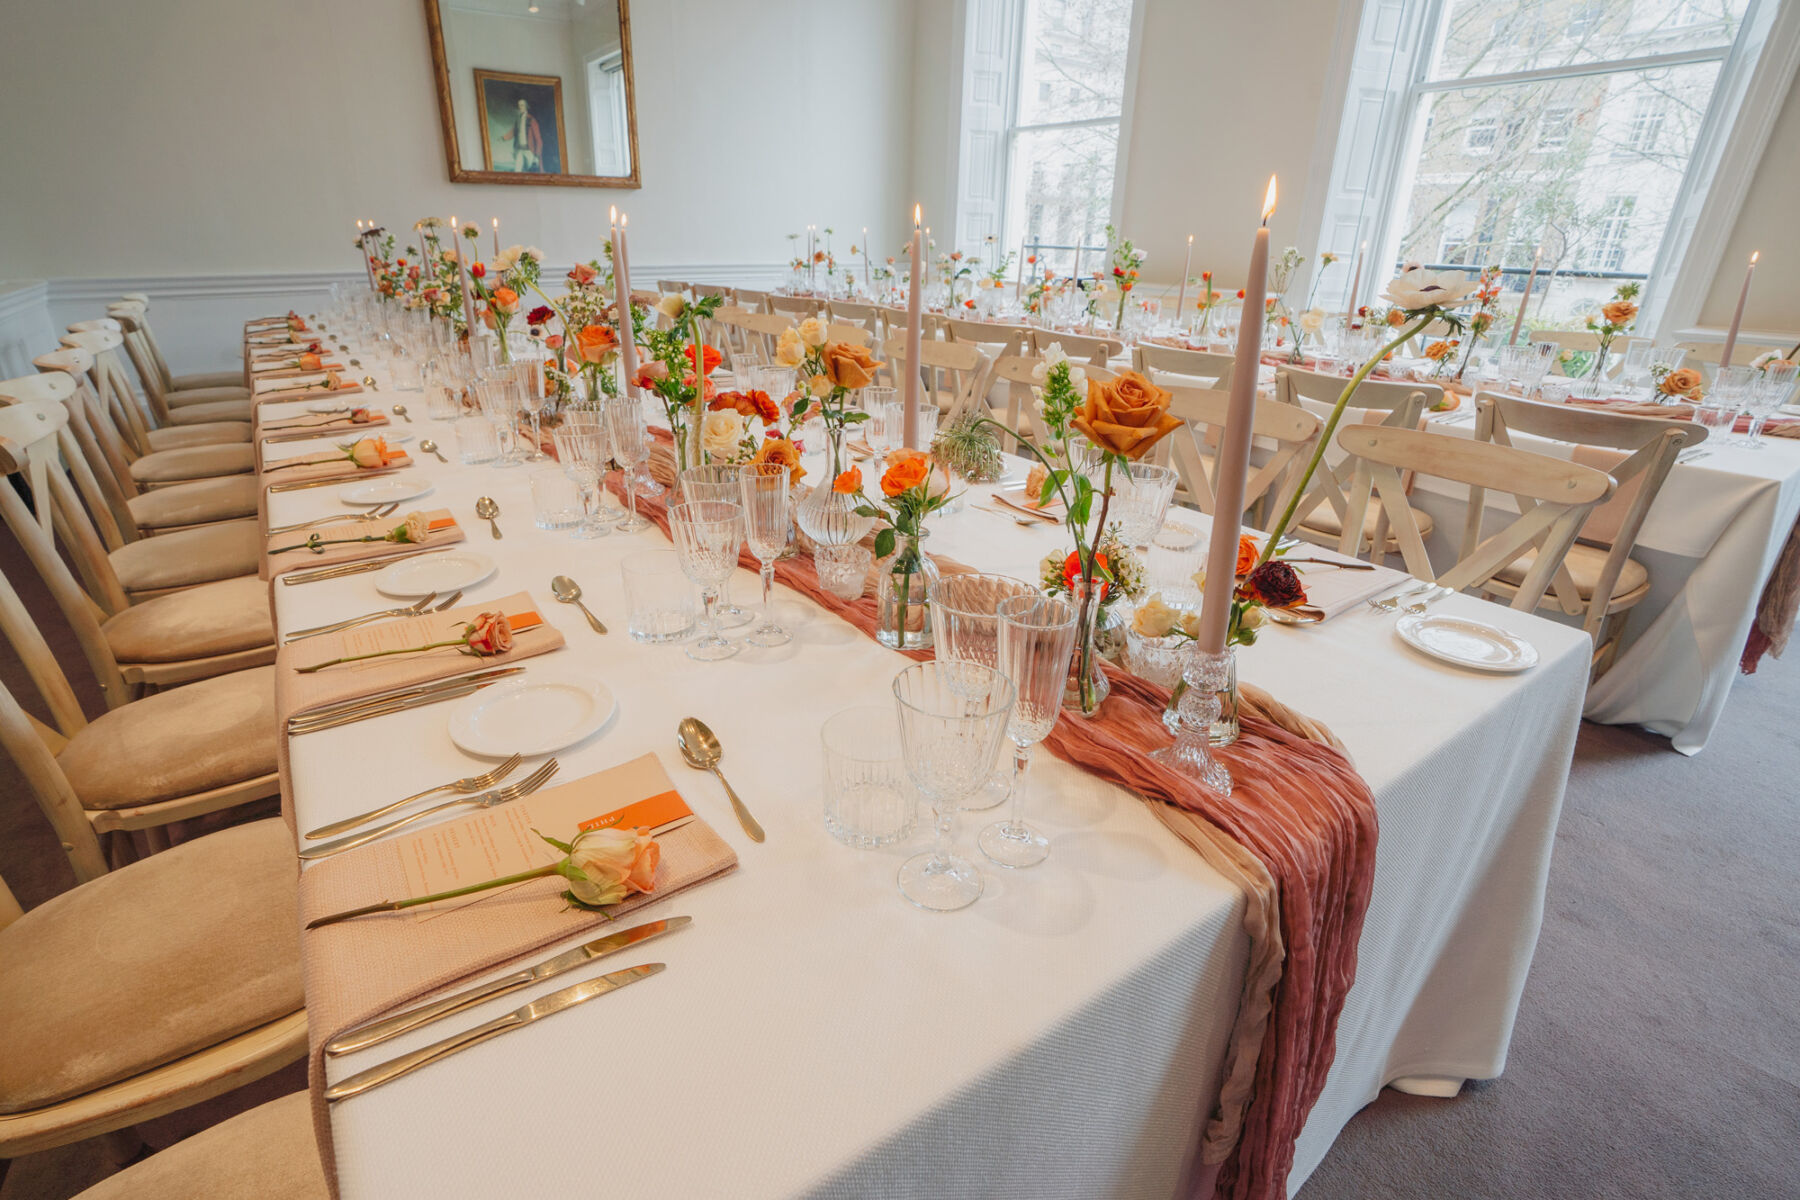 Elegant orange and cream wedding flowers in bud vases surrounded by rubbed glasses, taper candles and hand dyed table runners.